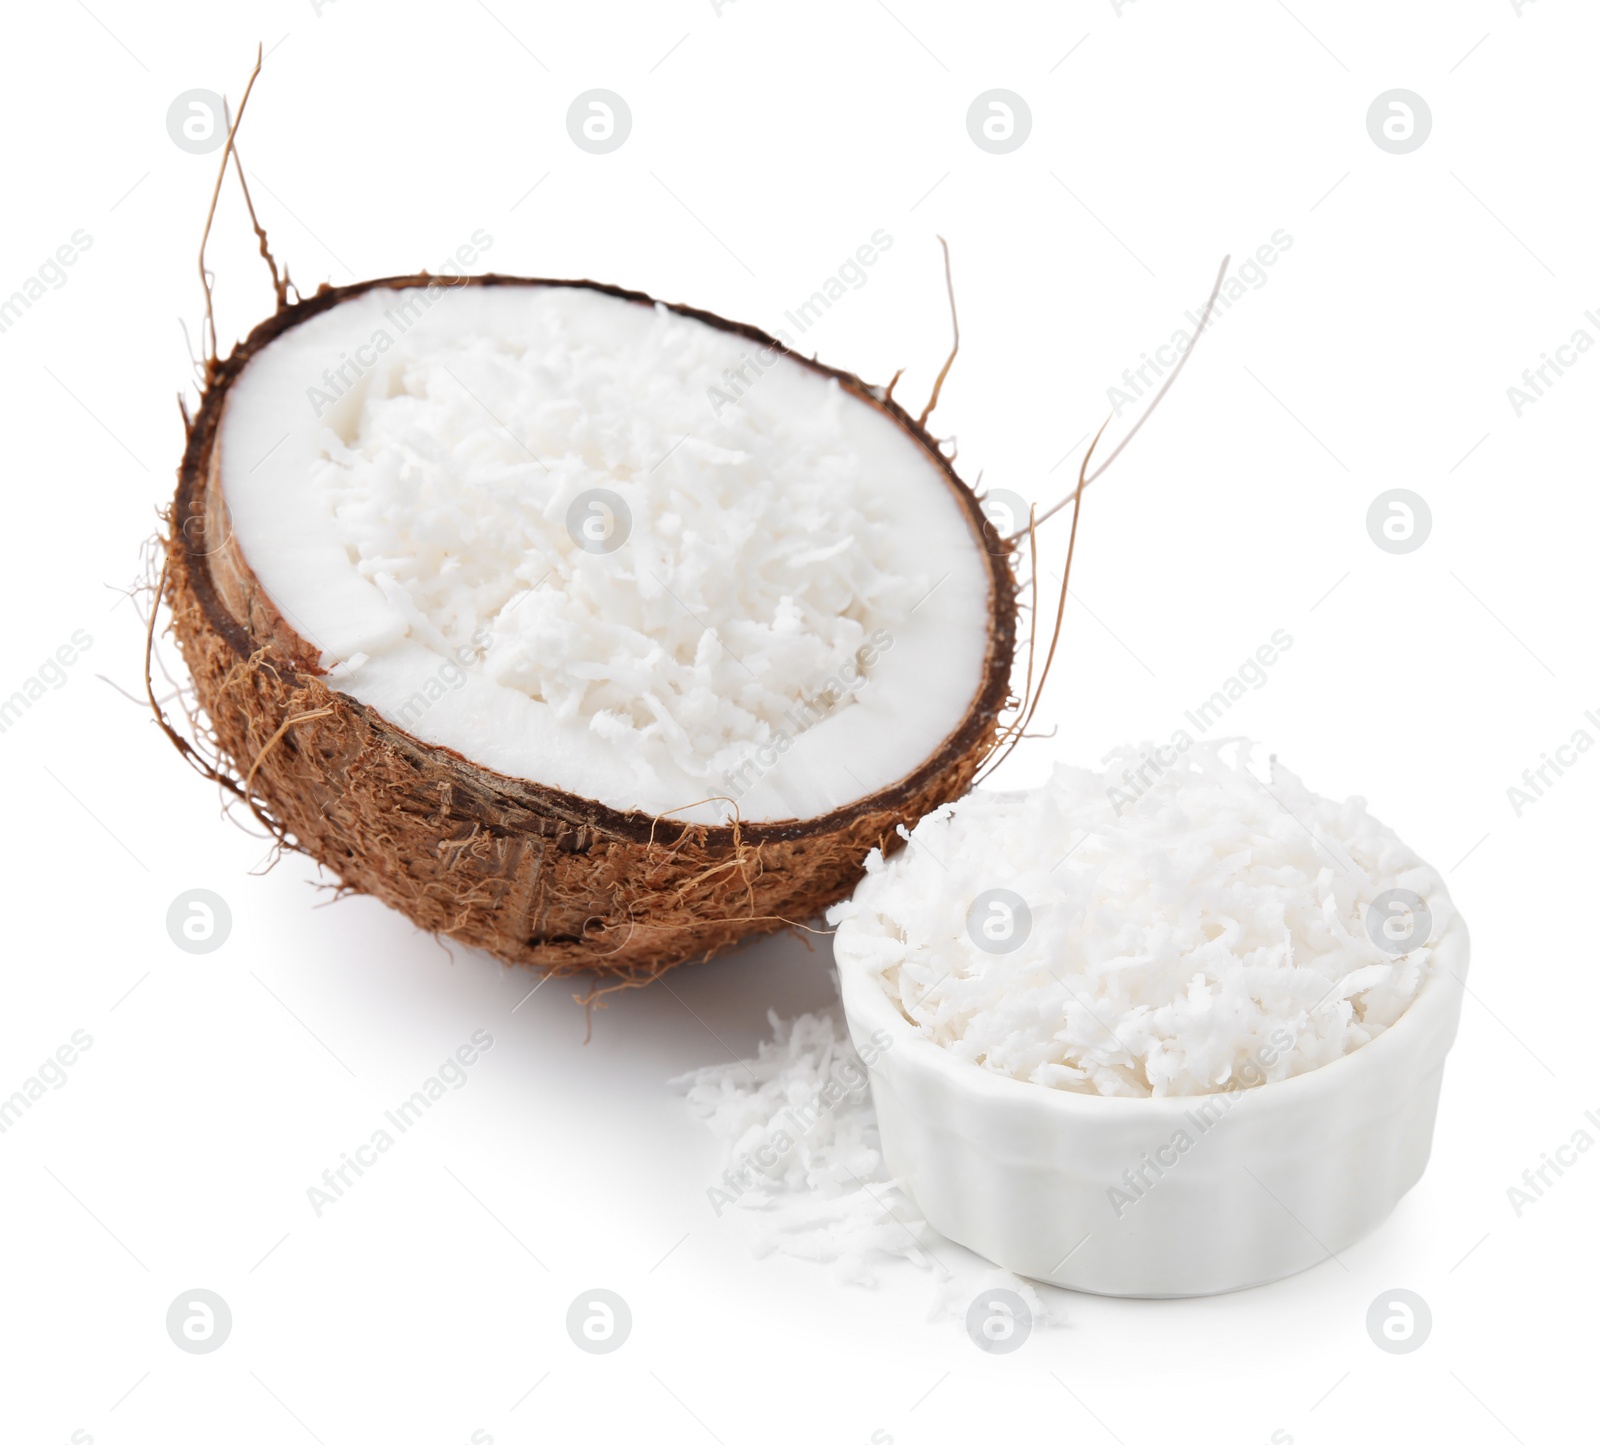 Photo of Coconut flakes and nut isolated on white